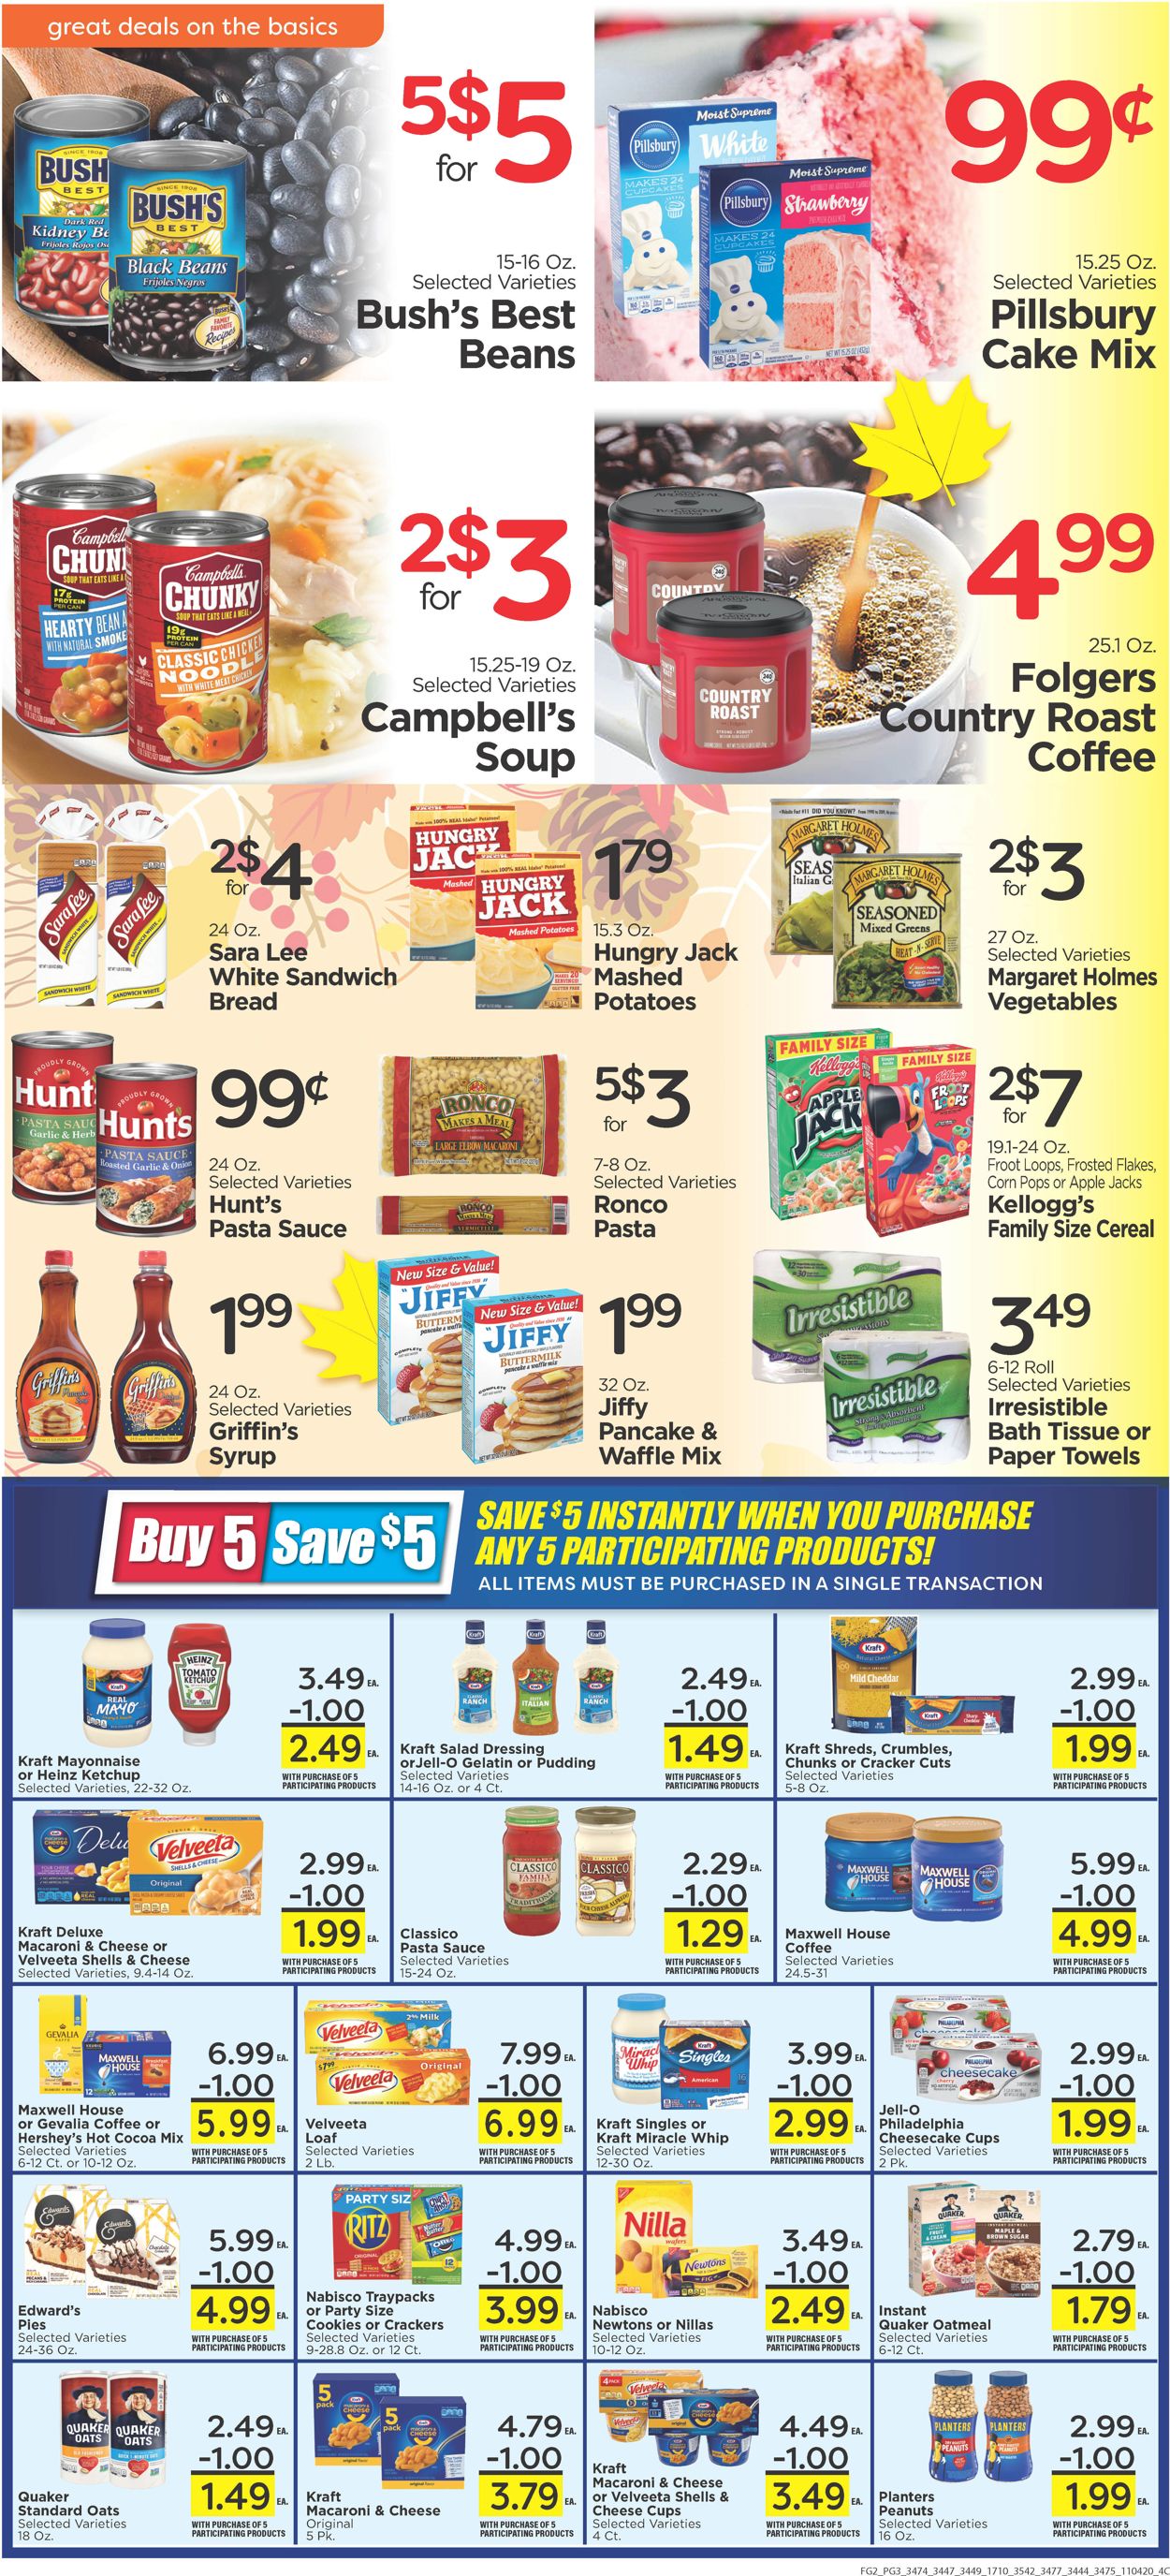 Edwards Food Giant Current weekly ad 11/04 - 11/10/2020 [3] - frequent ...